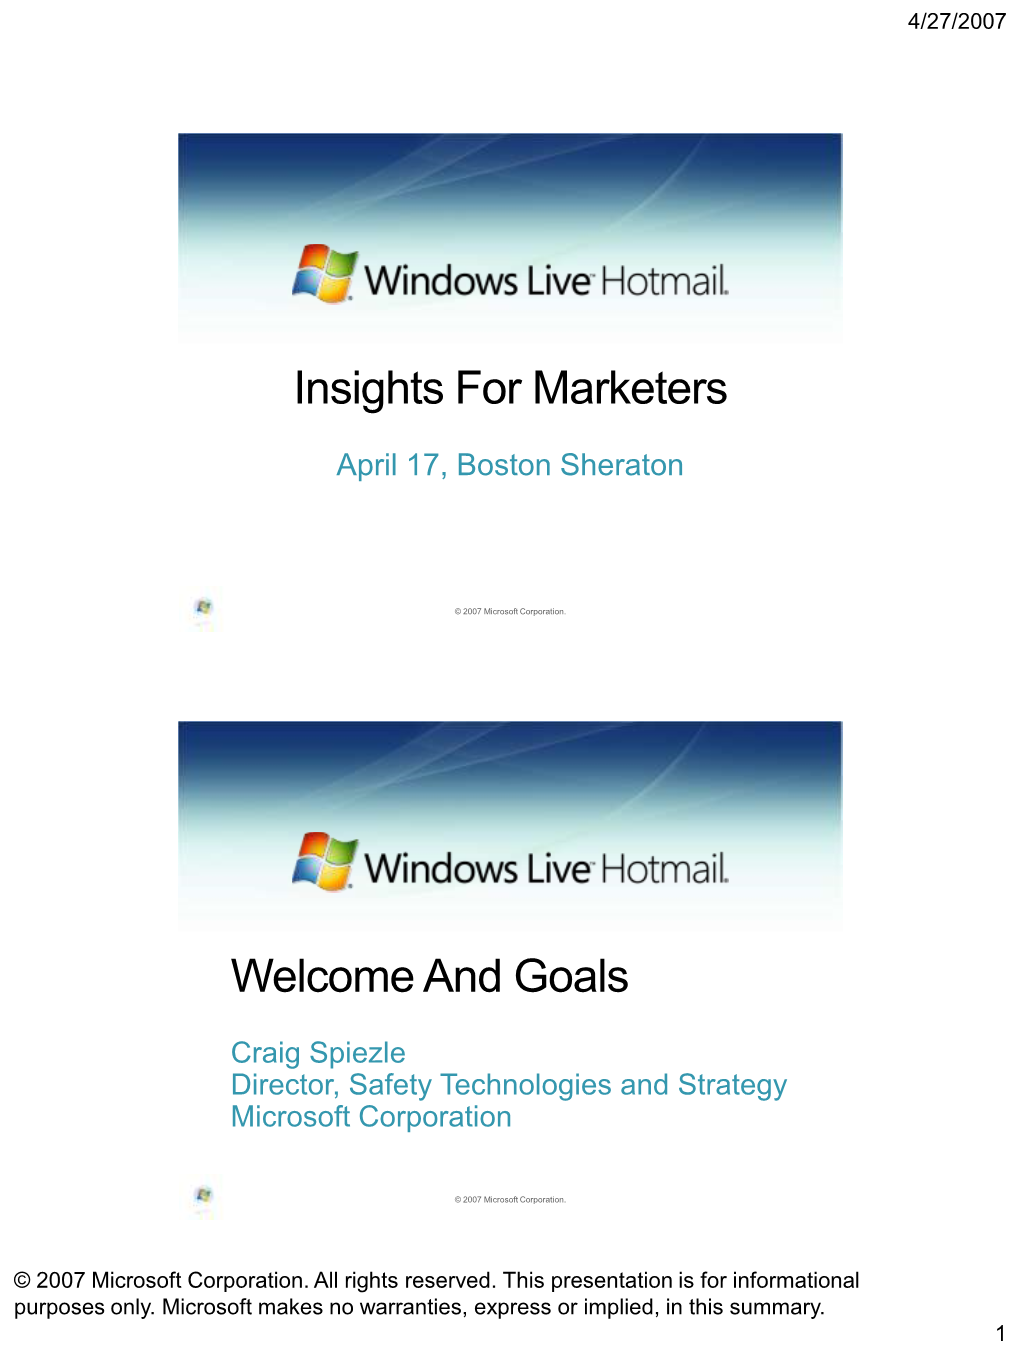 Insights for Marketers Welcome and Goals